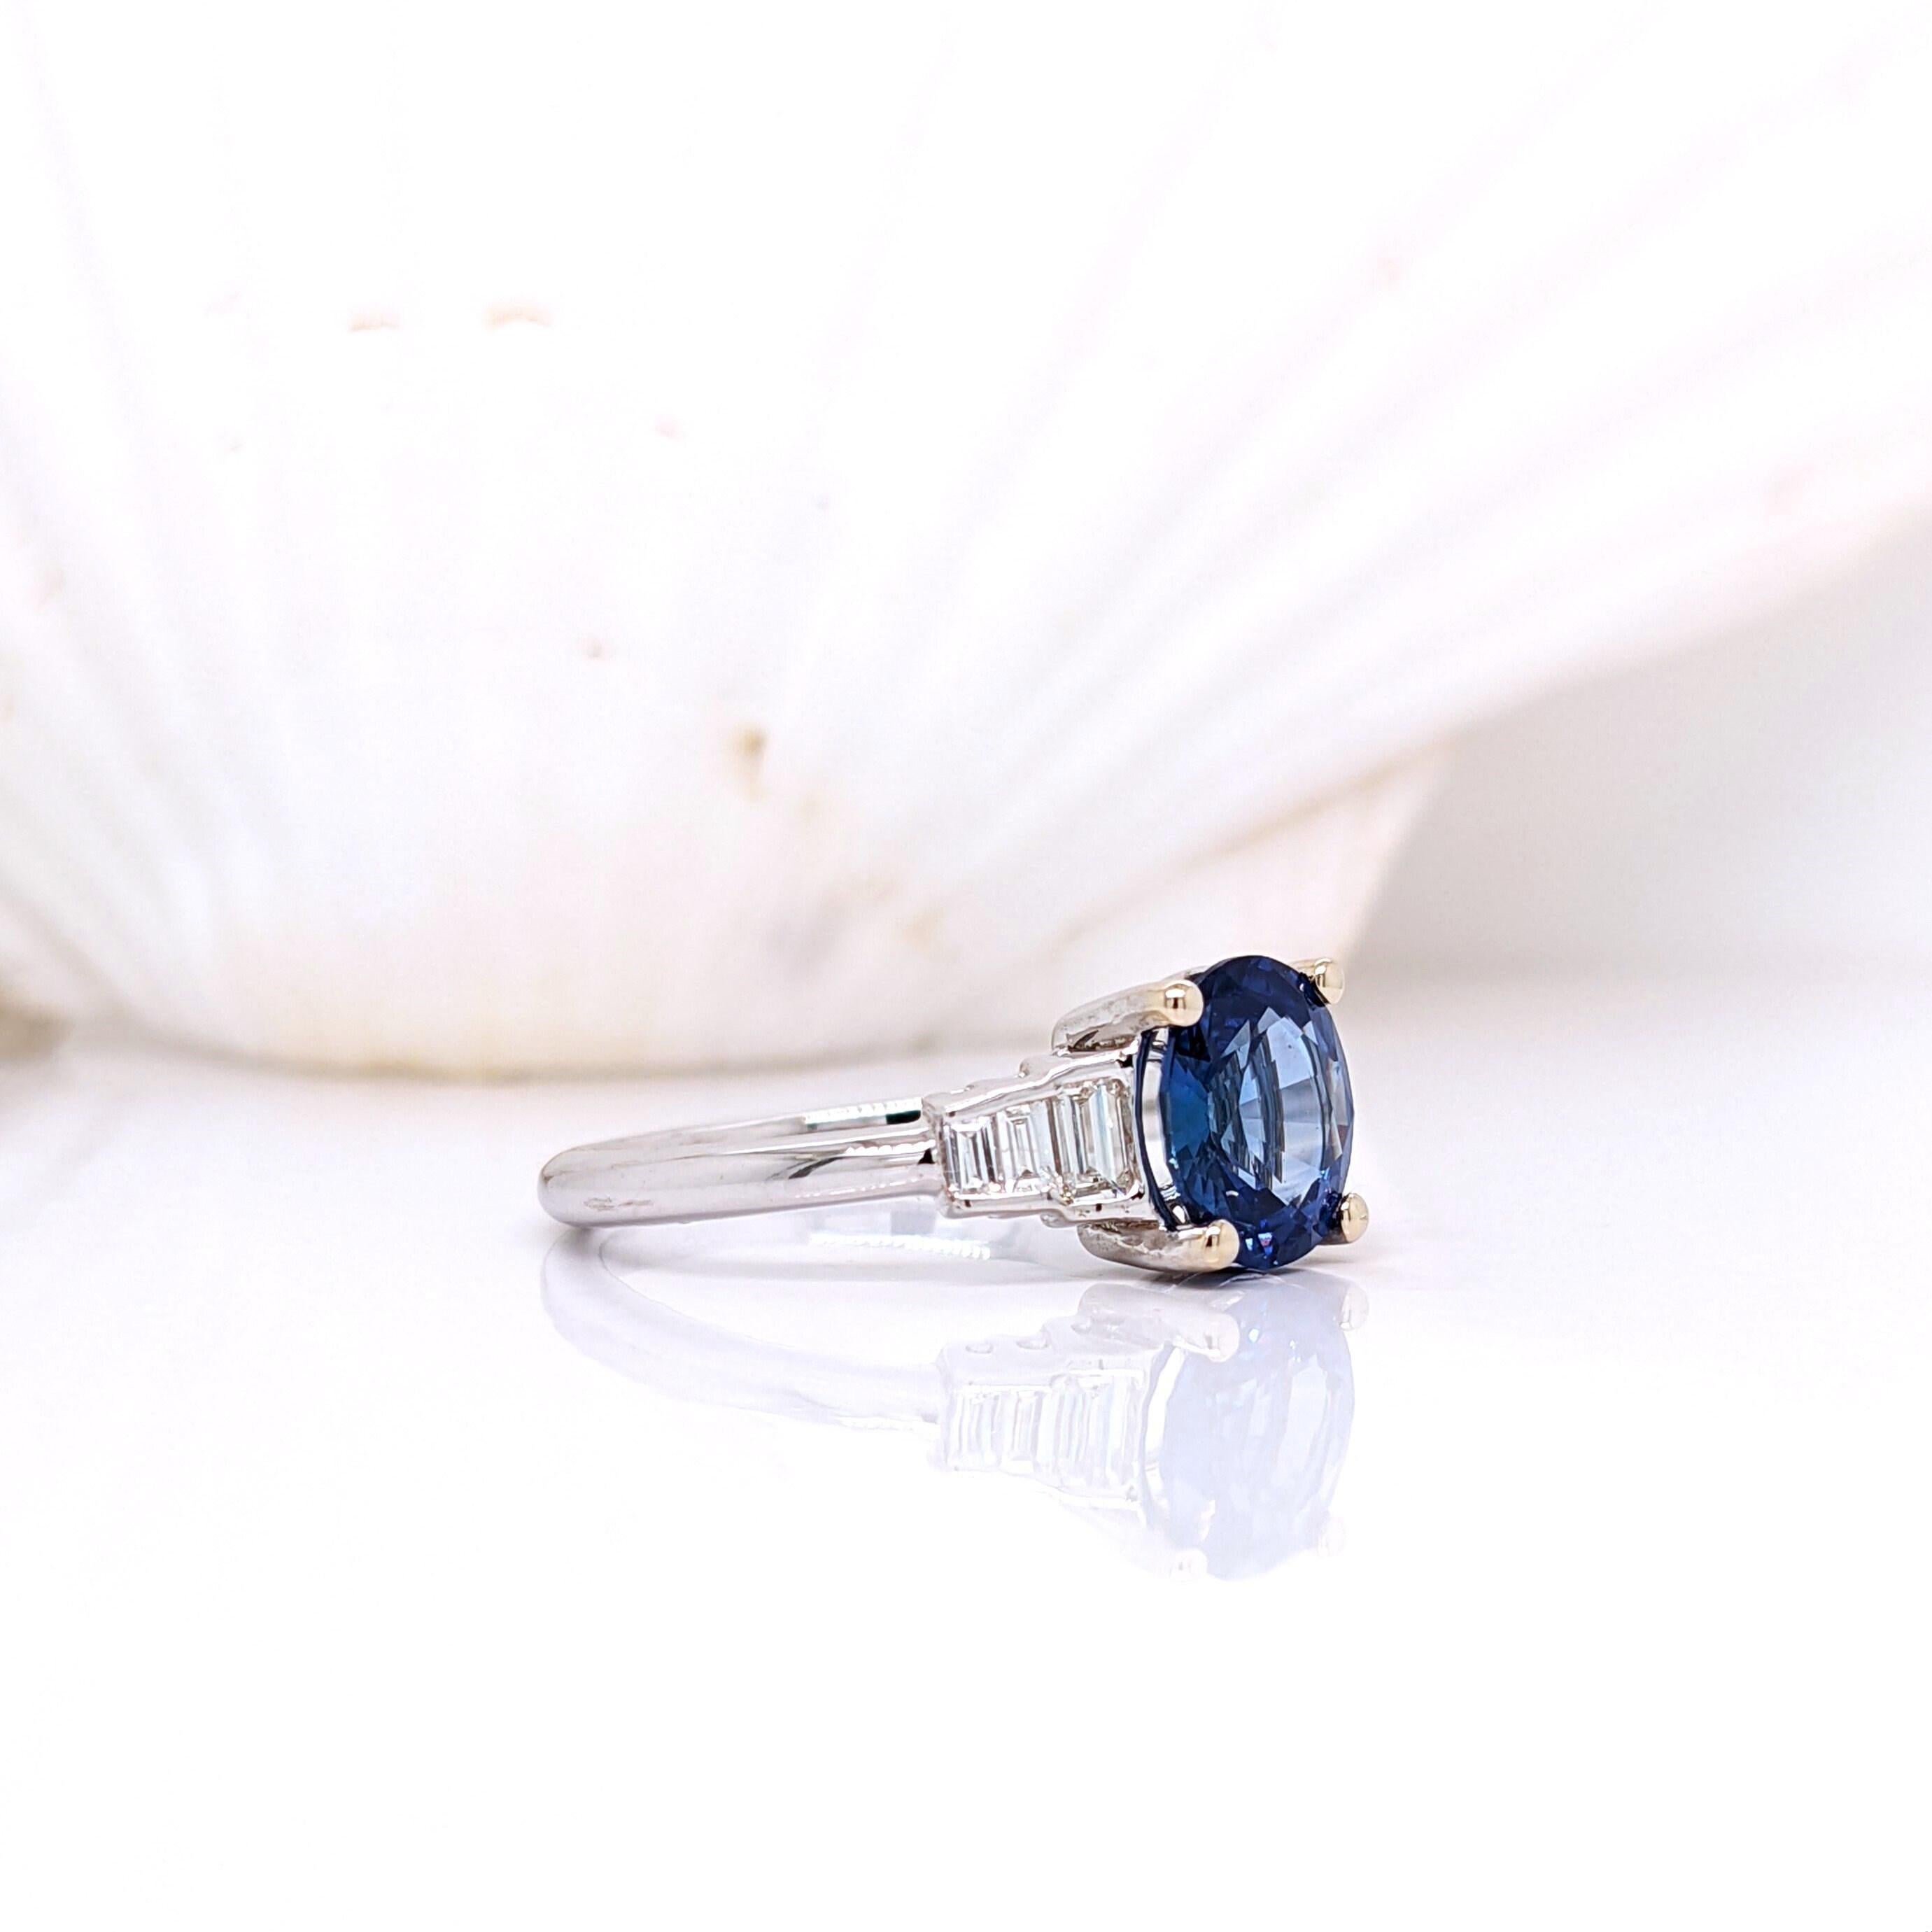 A beautiful oval cut blue sapphire that's heated to bring out a rich and pretty blue color! Perfectly accented by bezel set baguette diamonds and 14k white gold. 

Specifications

Item Type: Ring
Center Stone: Sapphire
Treatment: